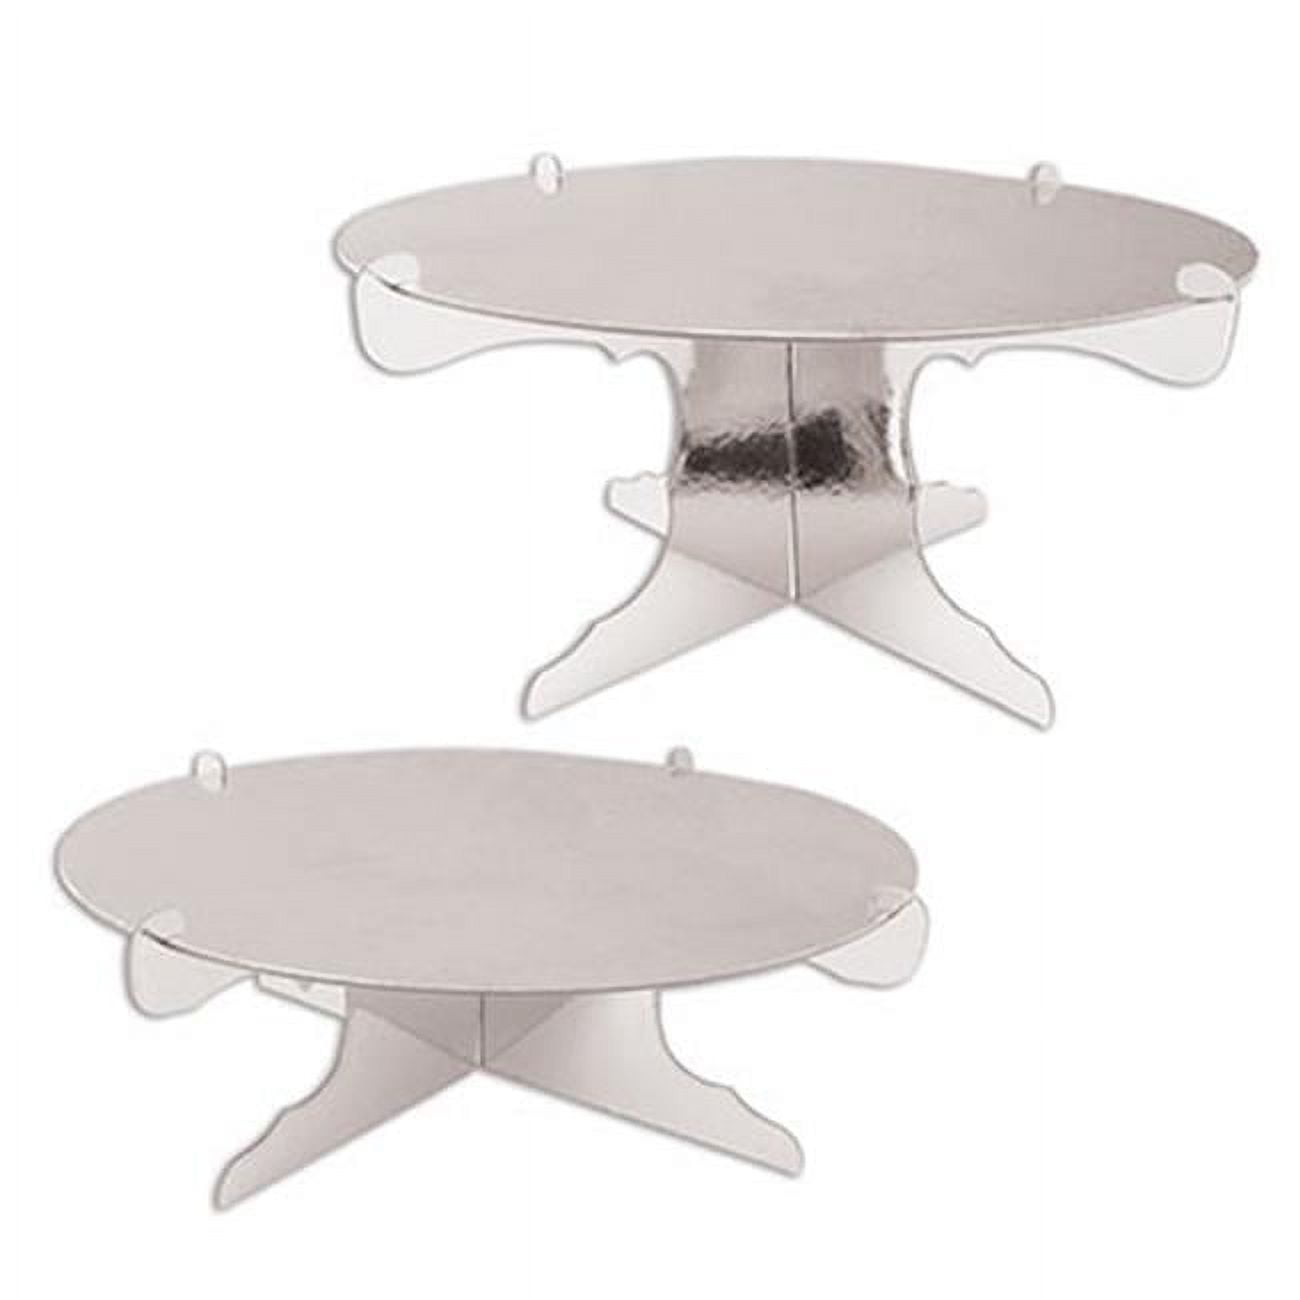 Picture of Beistle 53785-S 12.5 in. Dia. Metallic Cake Stands, Silver - Pack of 12